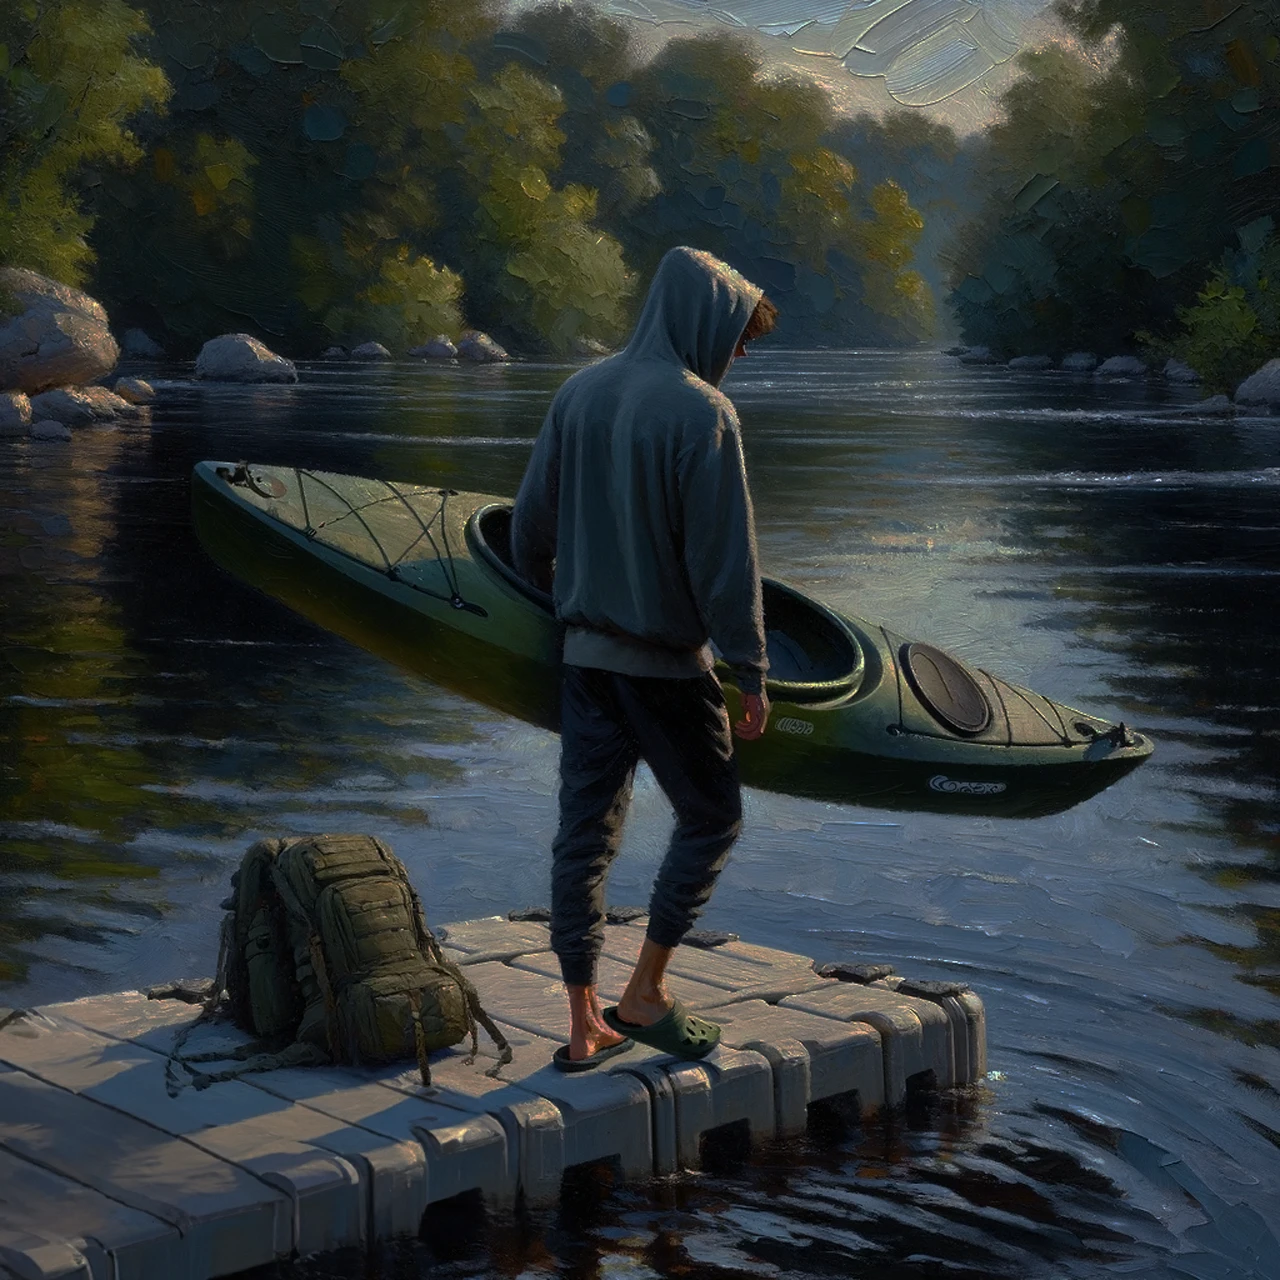 An impressionist style painting of a man holding a green kayak on a floating dock